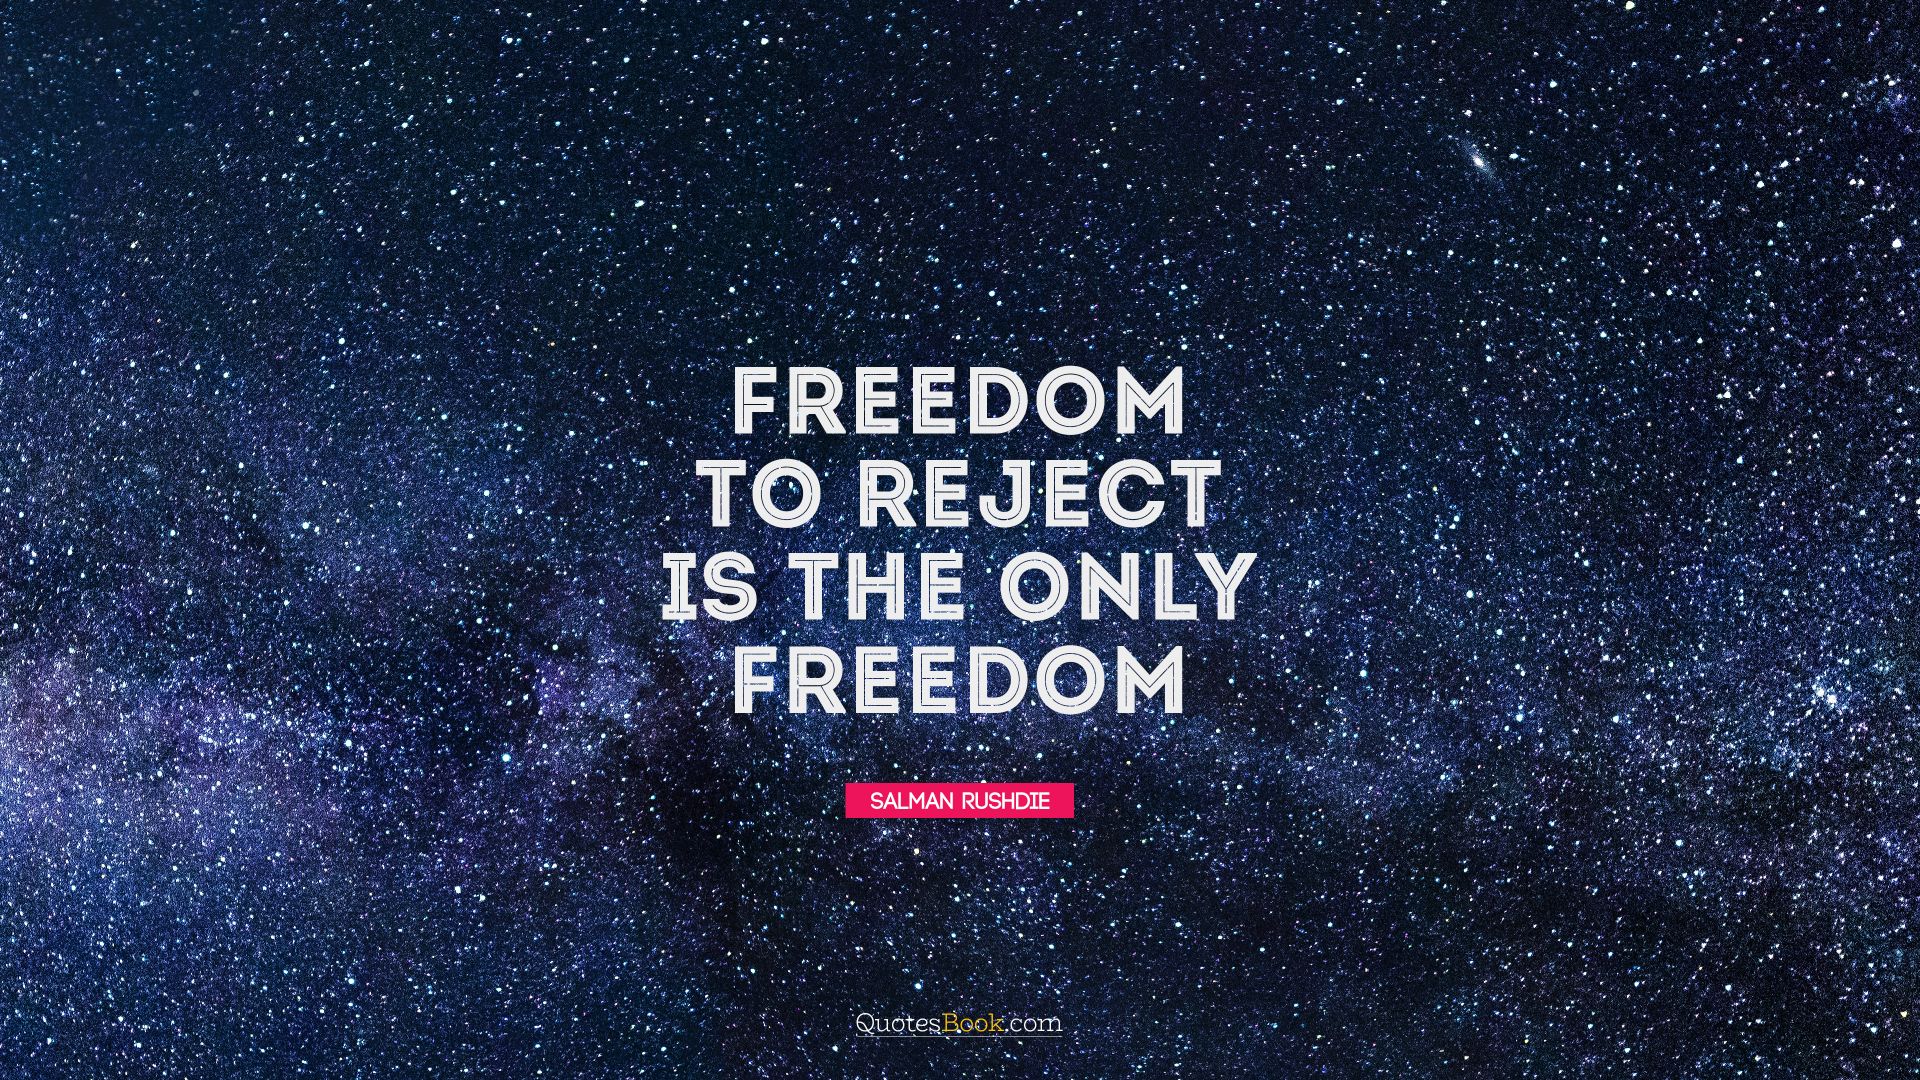 Freedom to reject is the only freedom. - Quote by Salman Rushdie